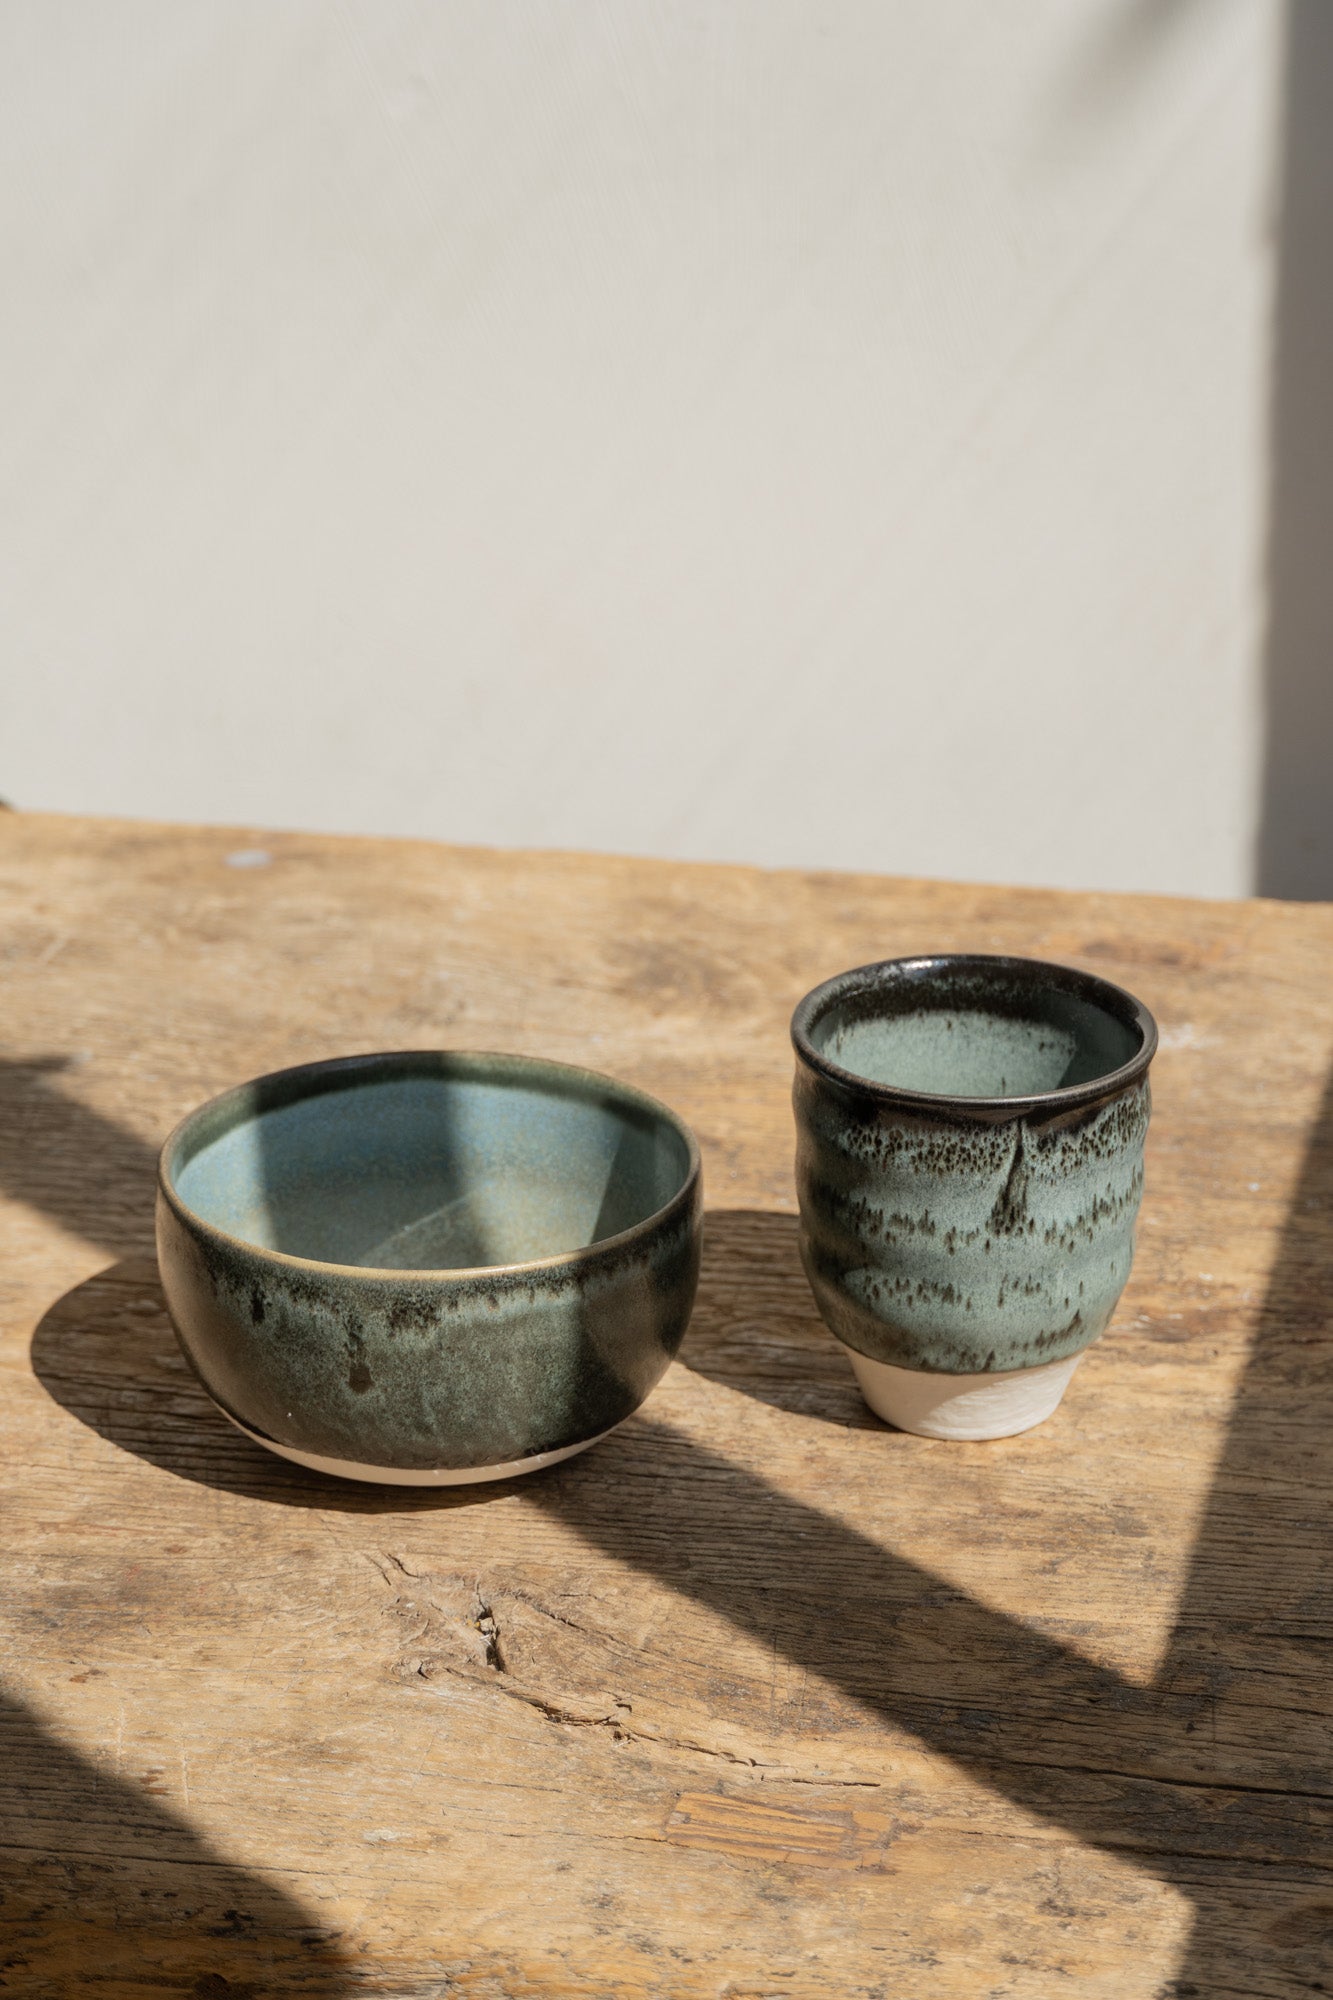 Dashi Bowl and Cup by Jars Ceramistes in Charbon